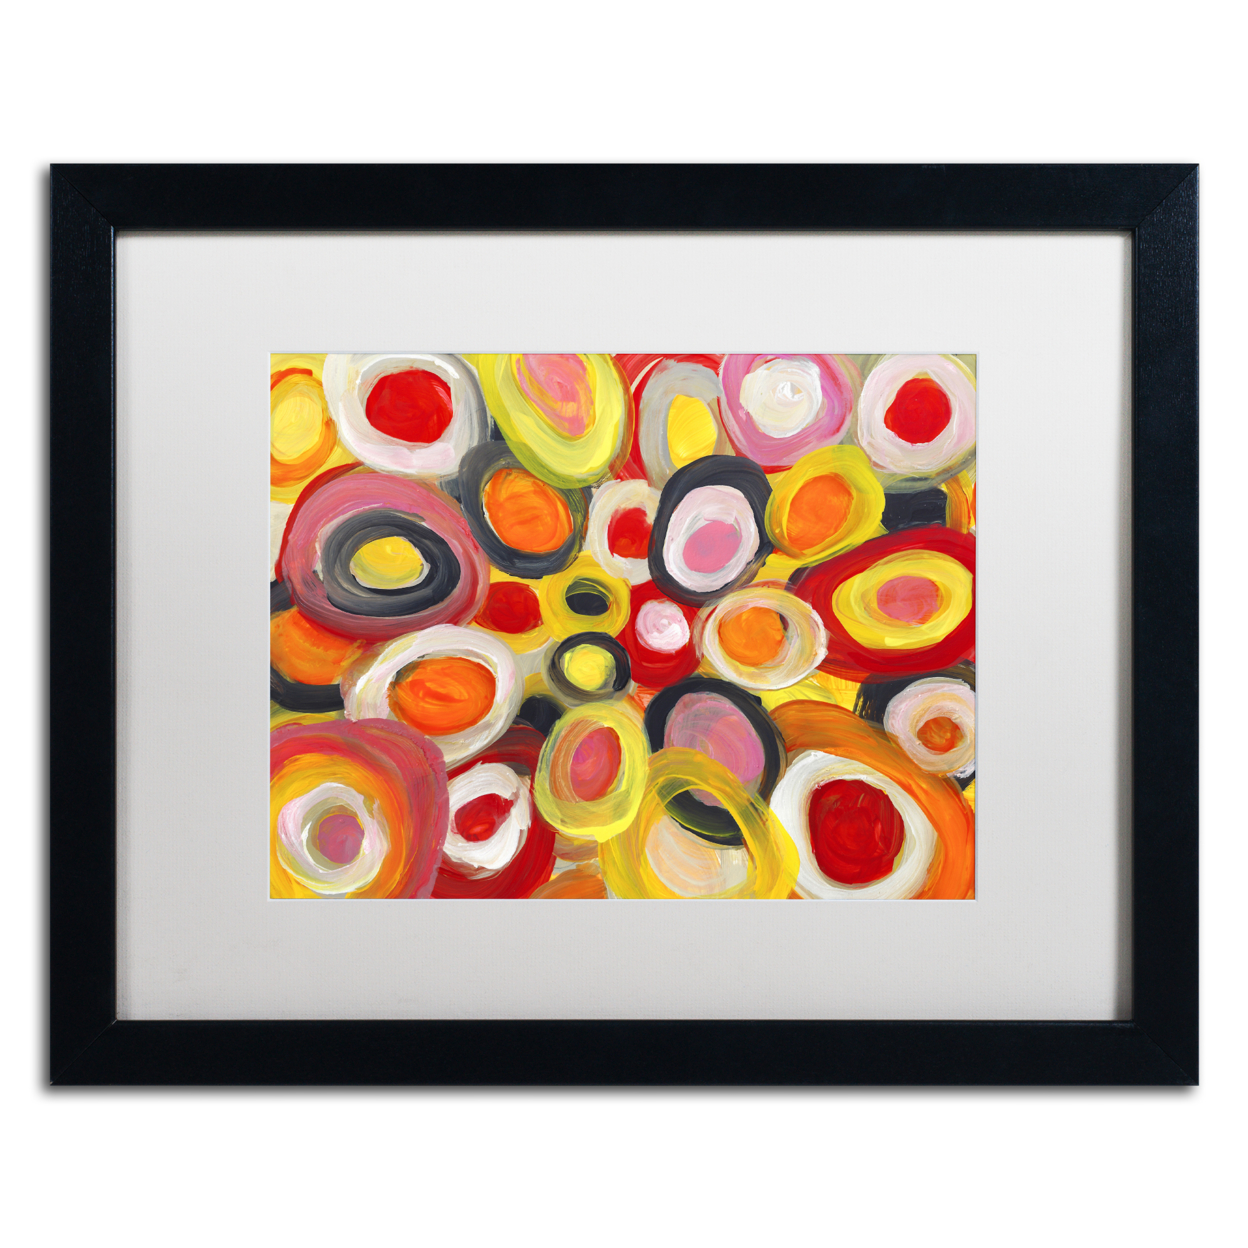 Amy Vangsgard 'Colorful Abstract Circles' Black Wooden Framed Art 18 X 22 Inches